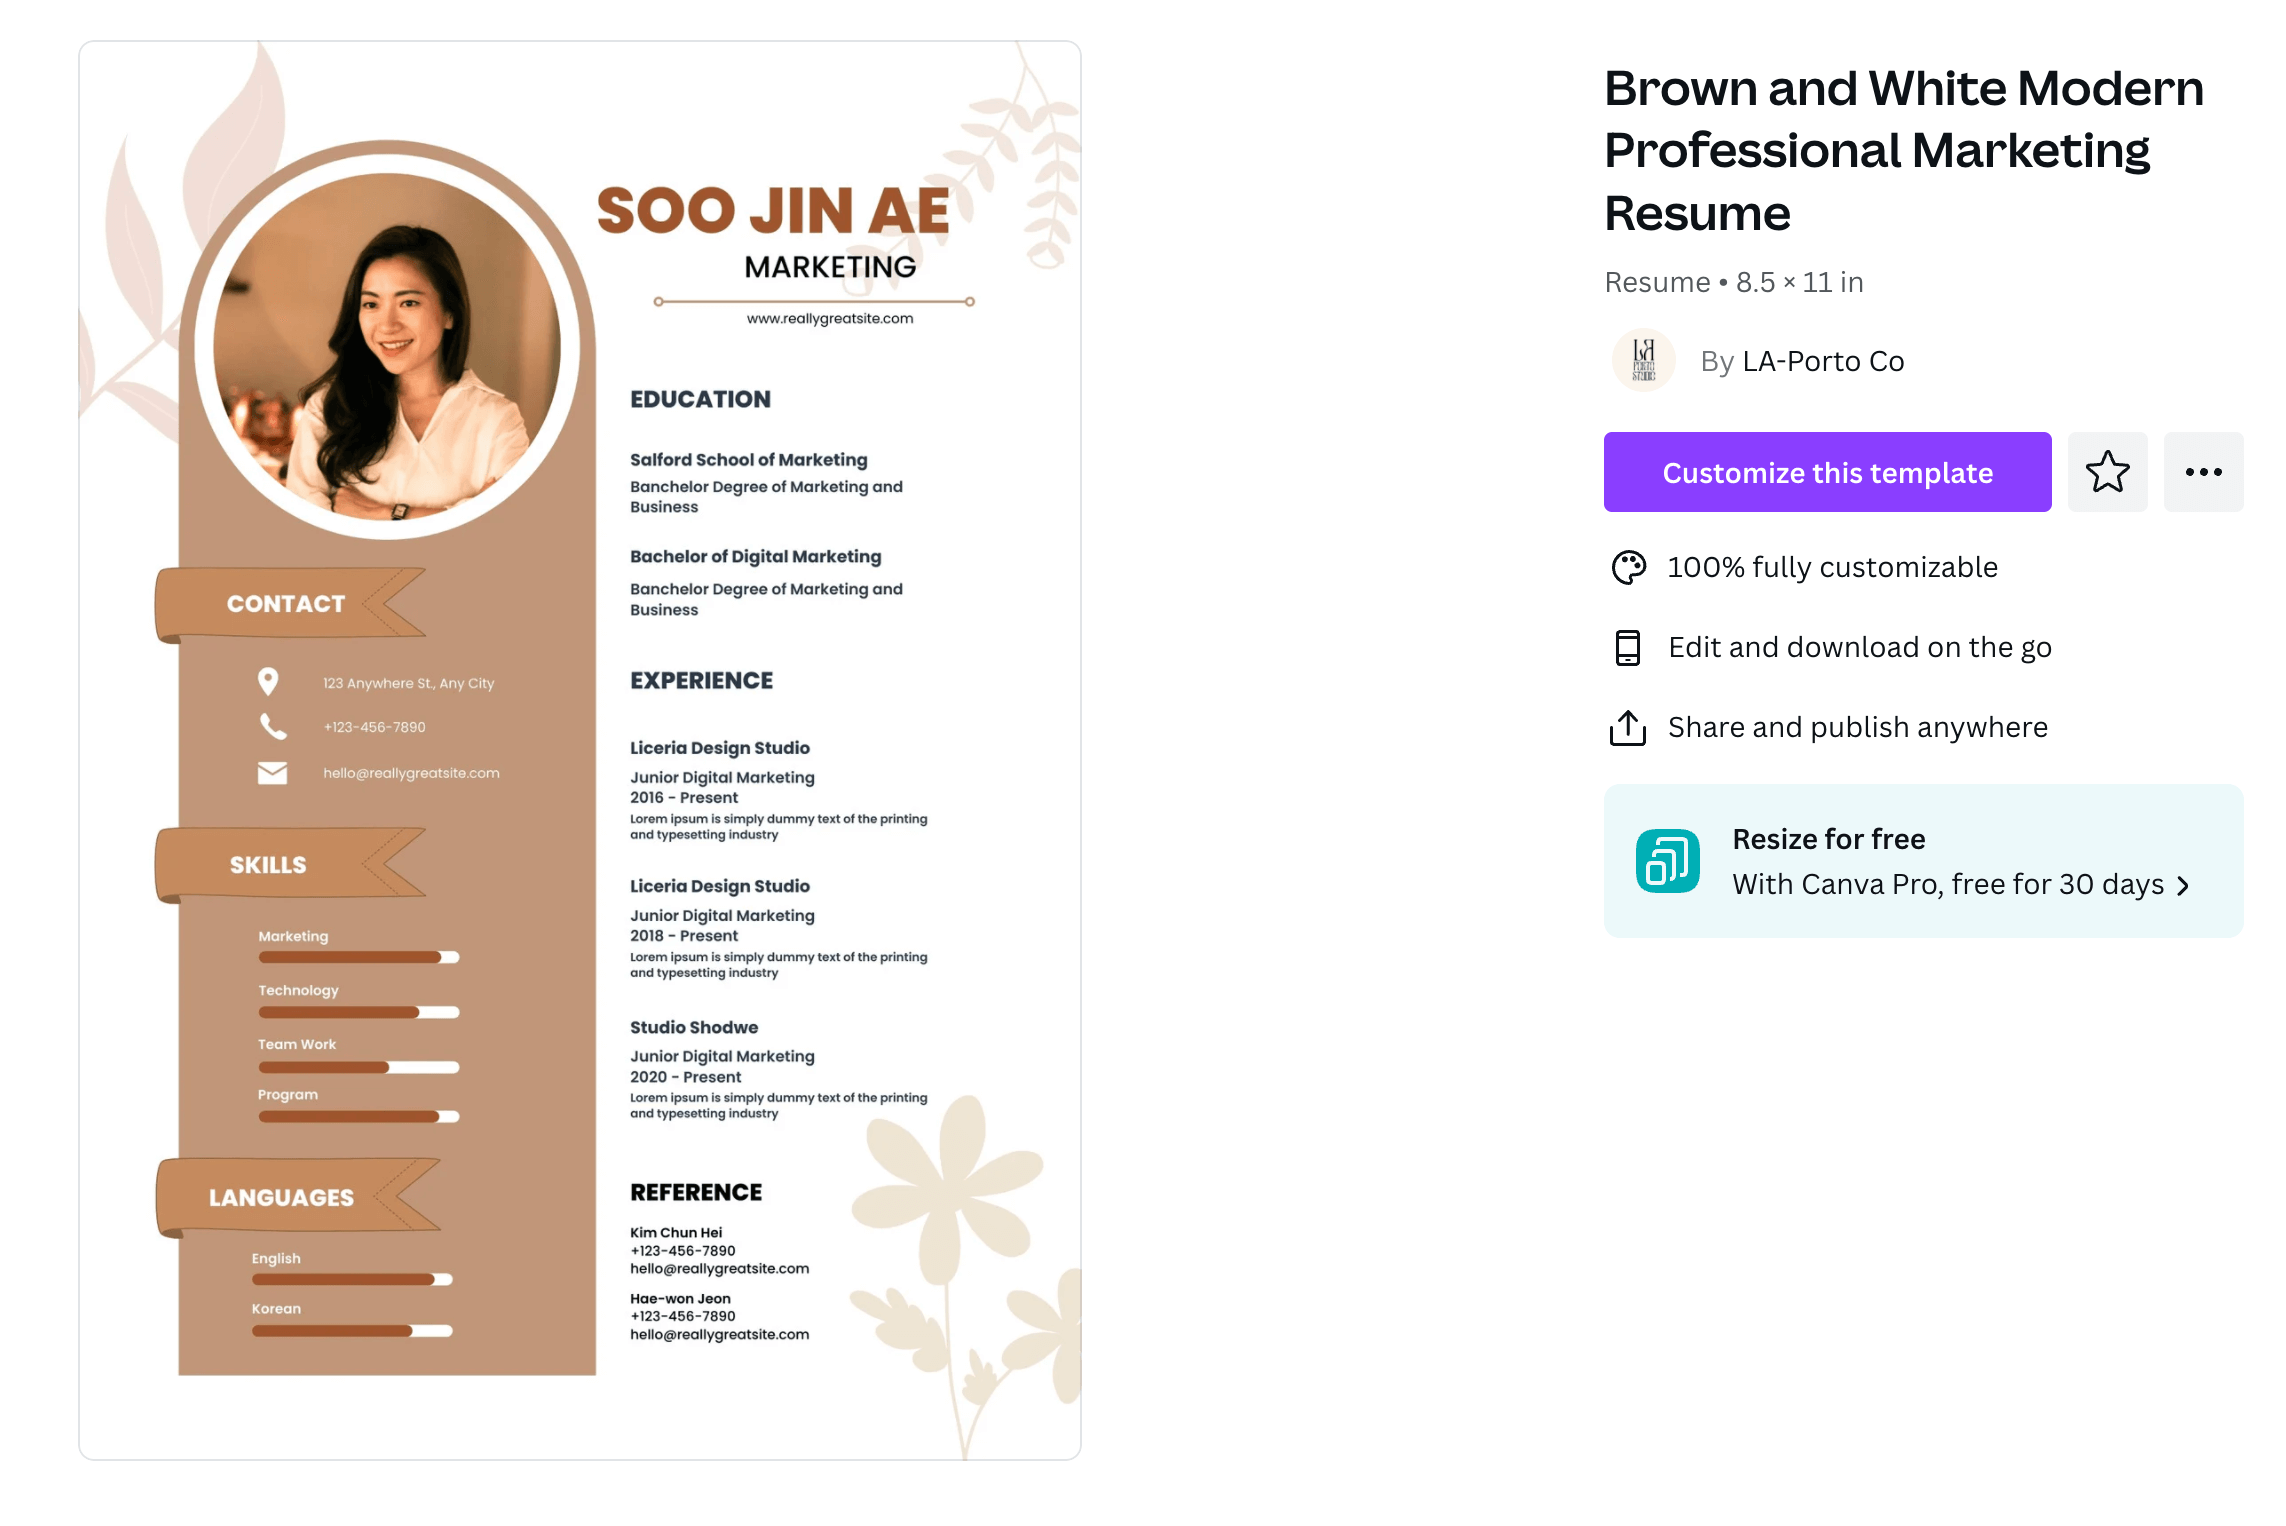 A neutral toned resume template for a marketing professional.